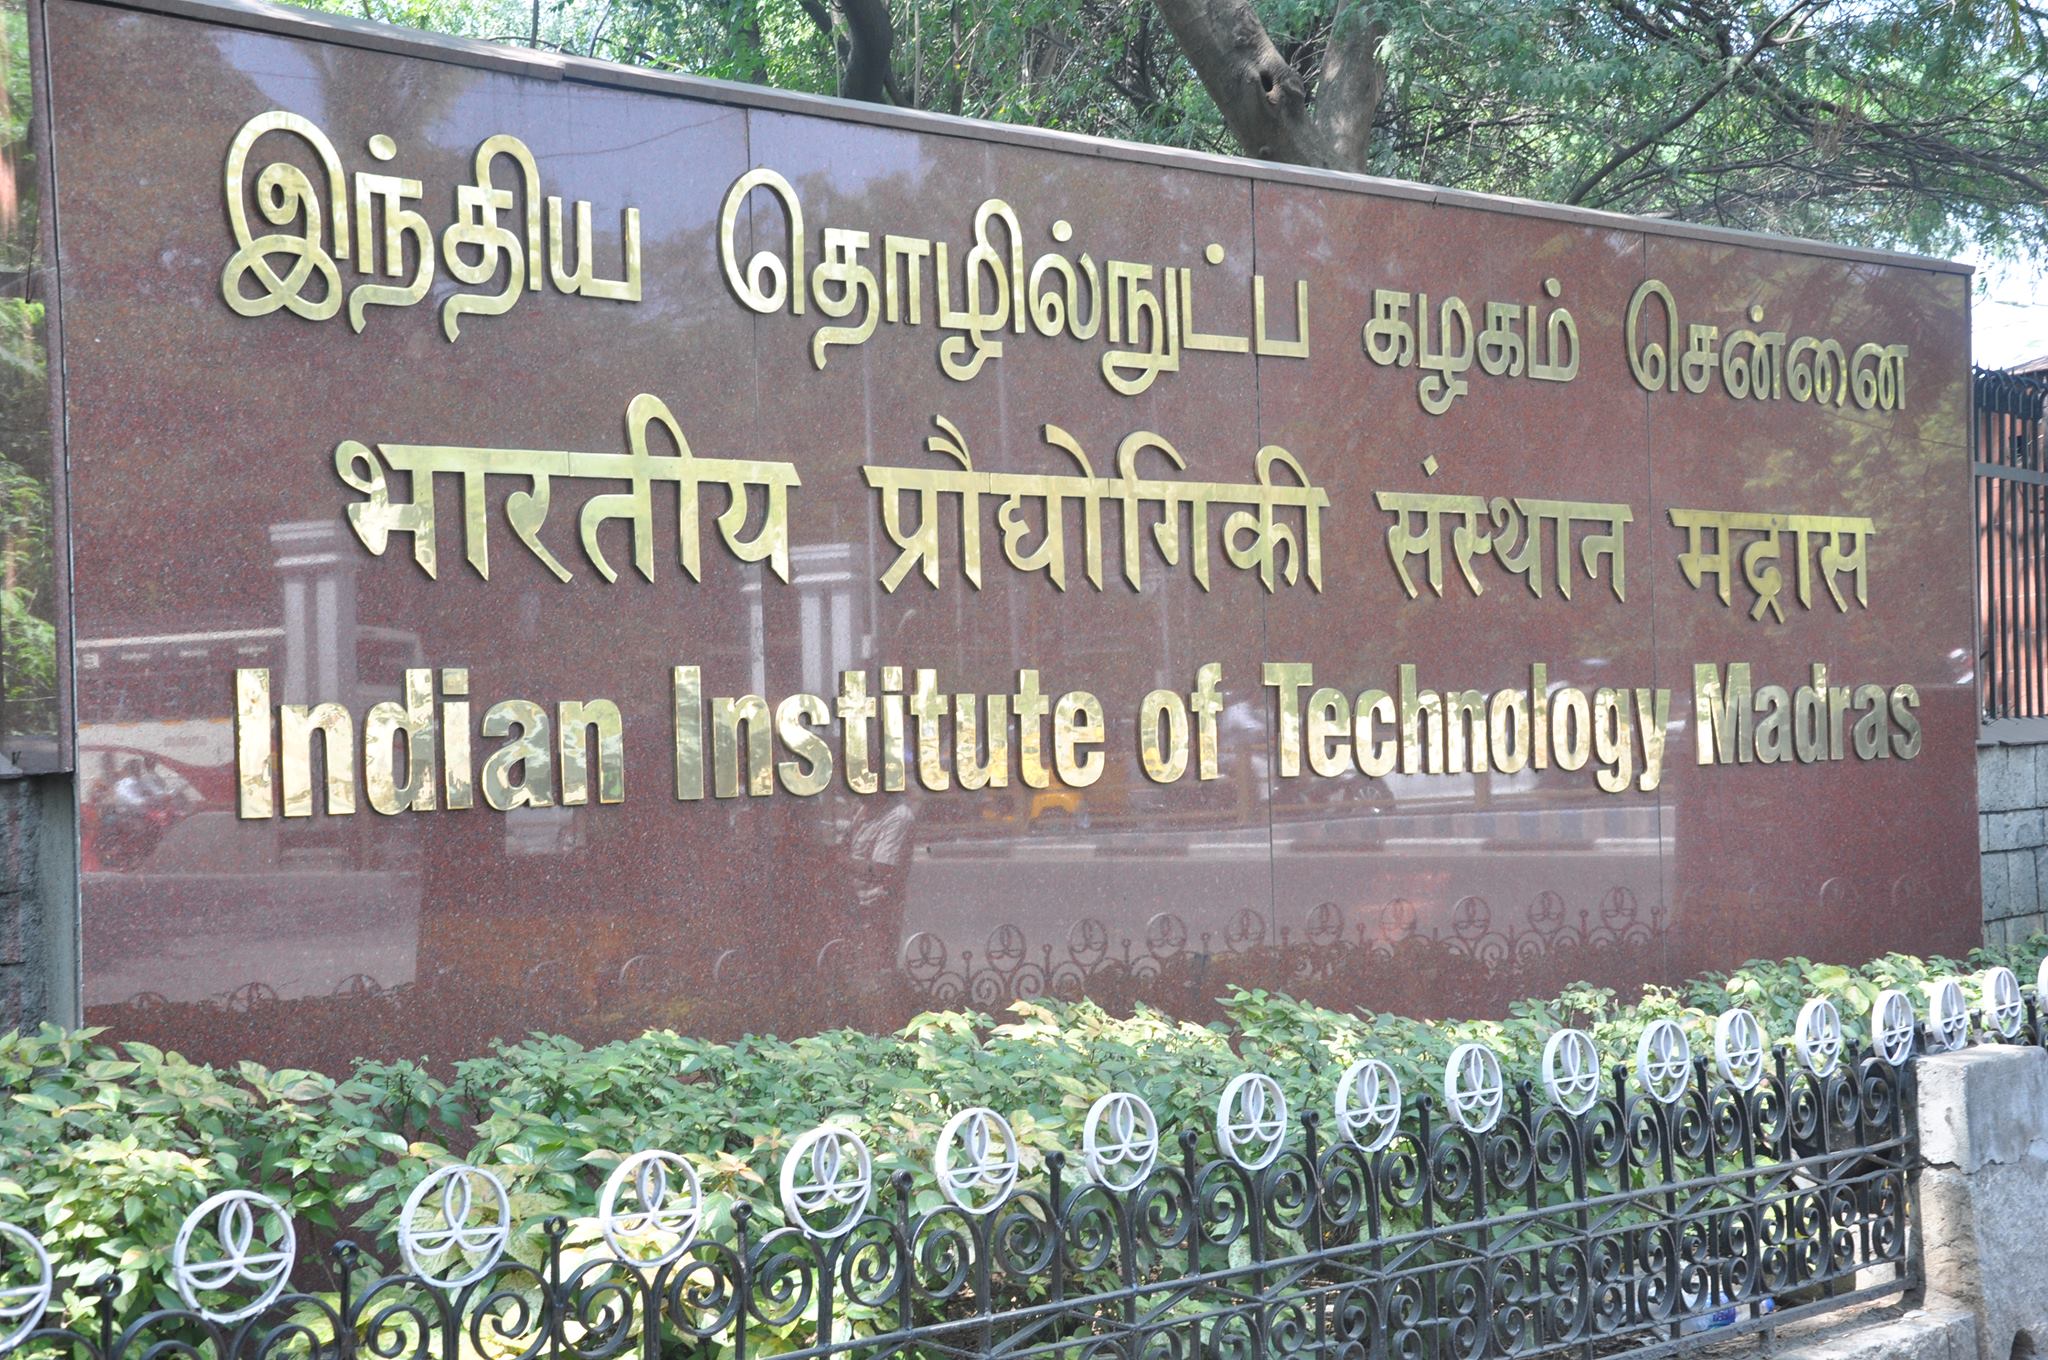 IIT Madras Digital Skills Academy Launches Banking, Financial Services & Insurance Sector Training Courses